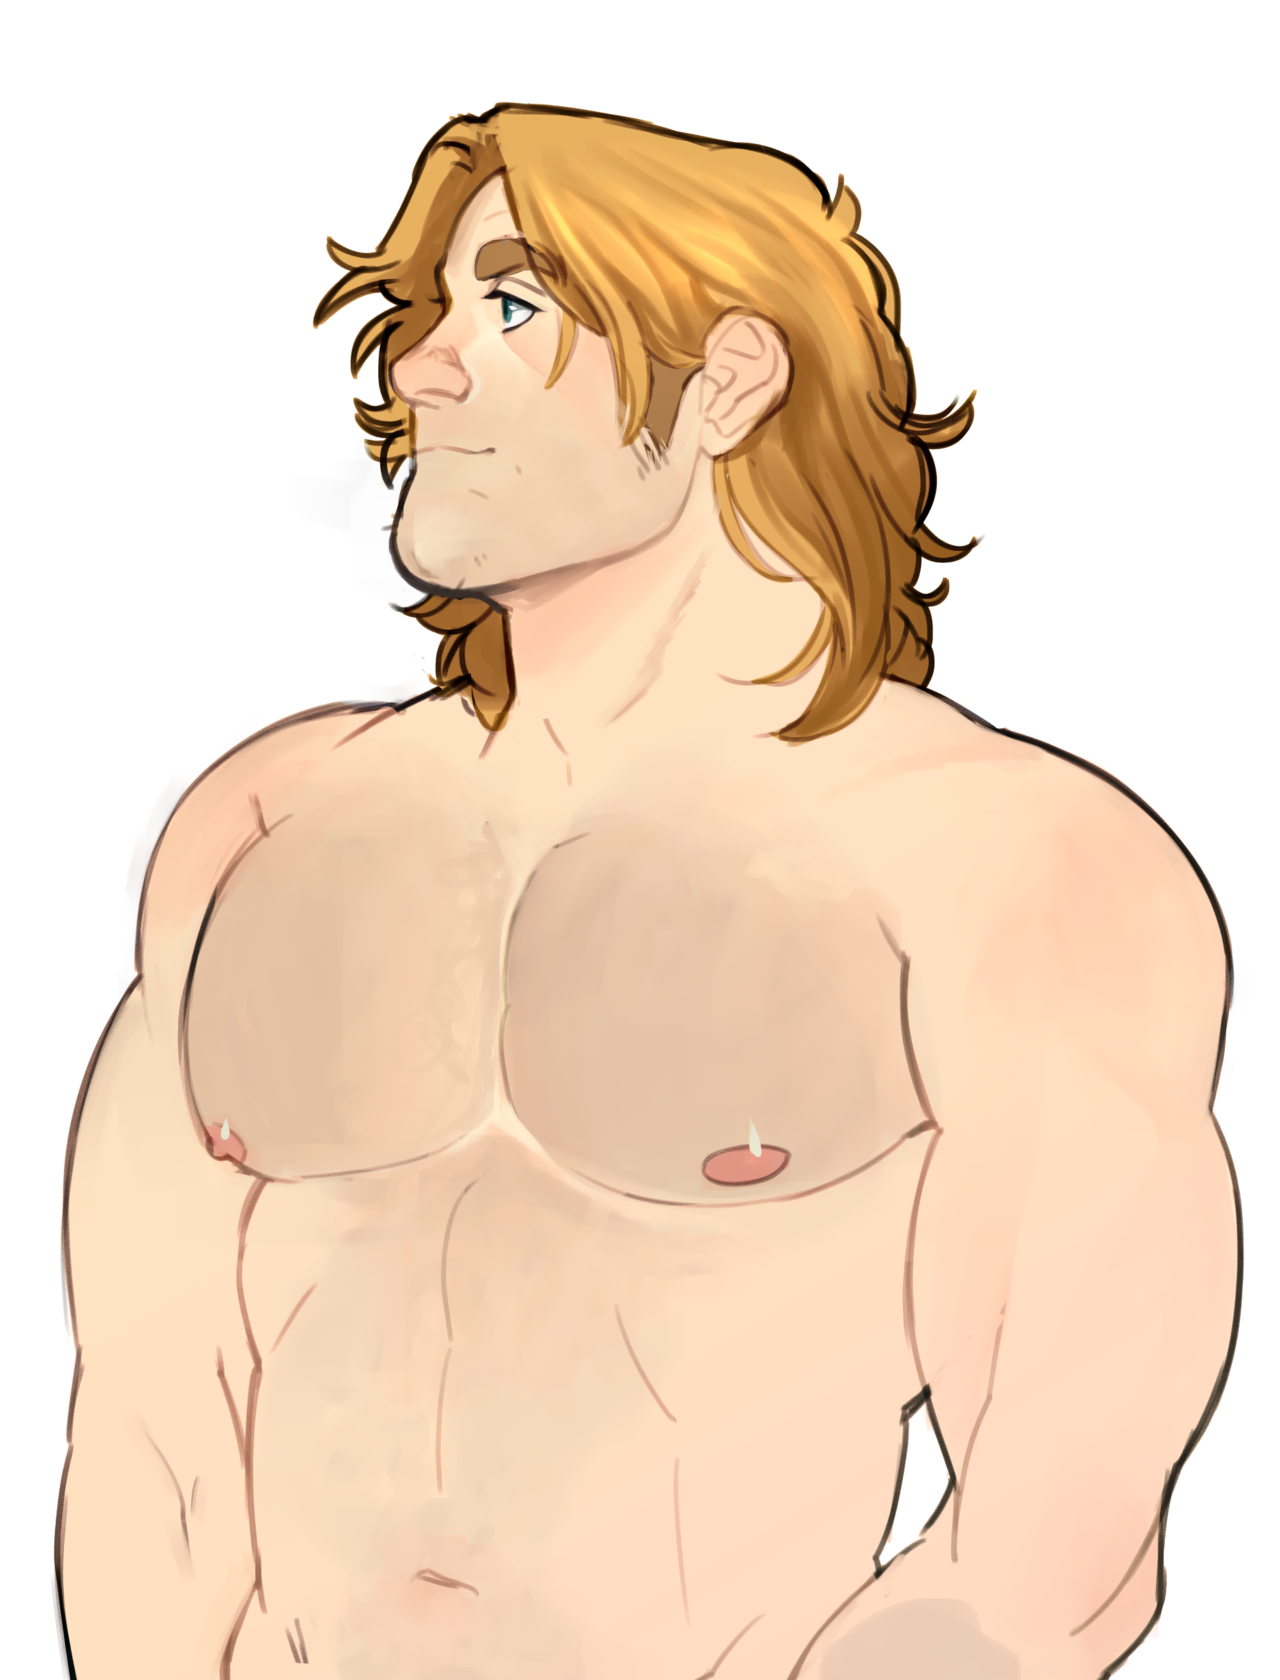 kinomatika:micah for a warmup… every time i draw him he seems to get a little broader